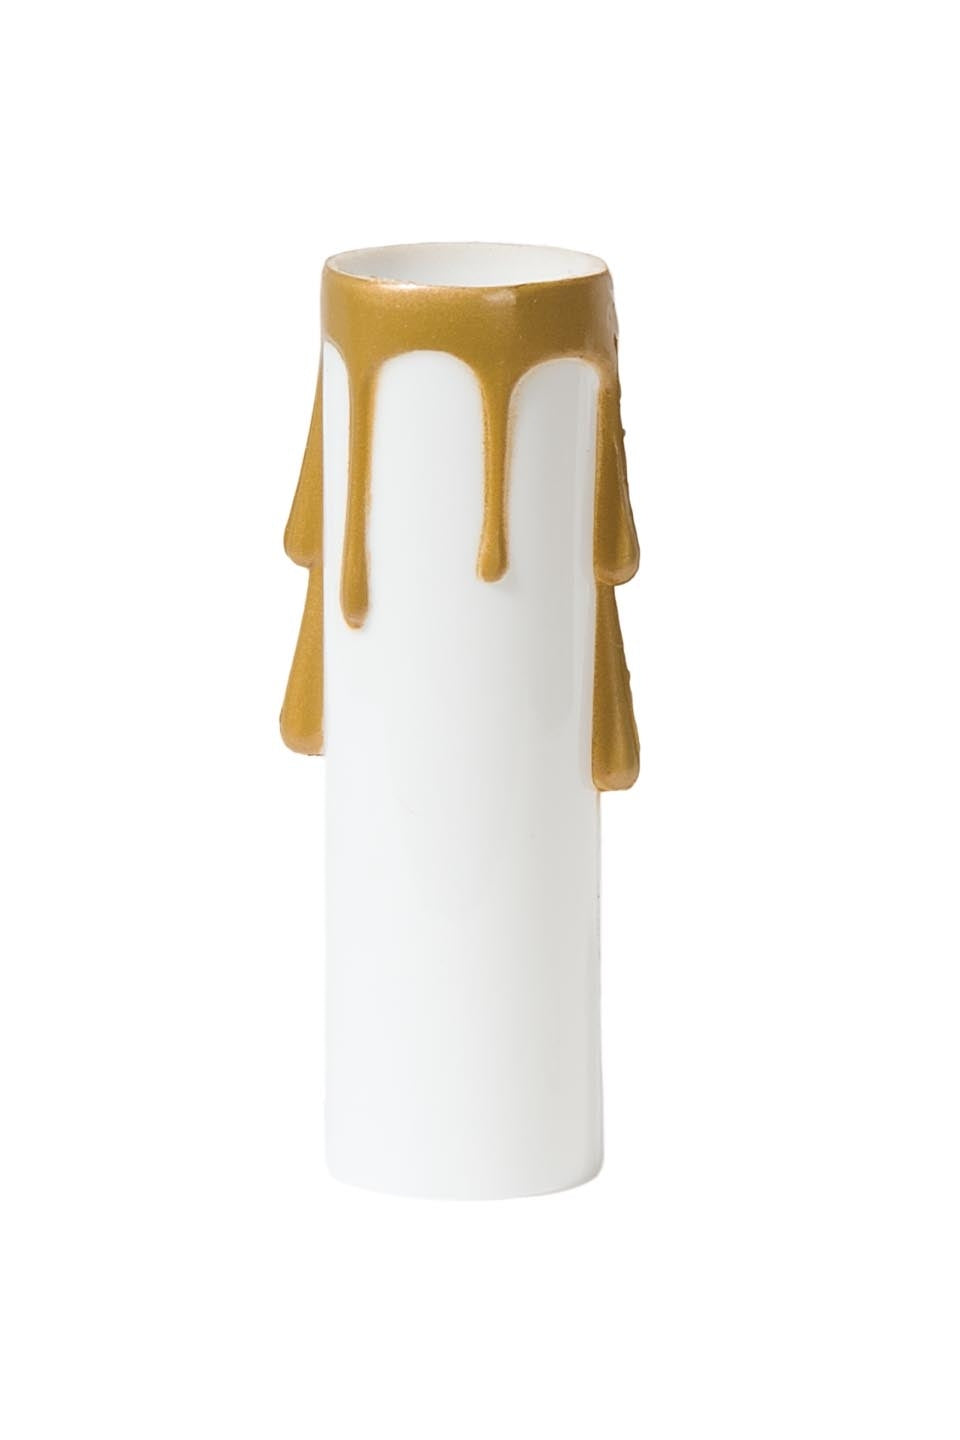 3 Inch Tall White Color Plastic Candelabra Size Candle Cover with Drips